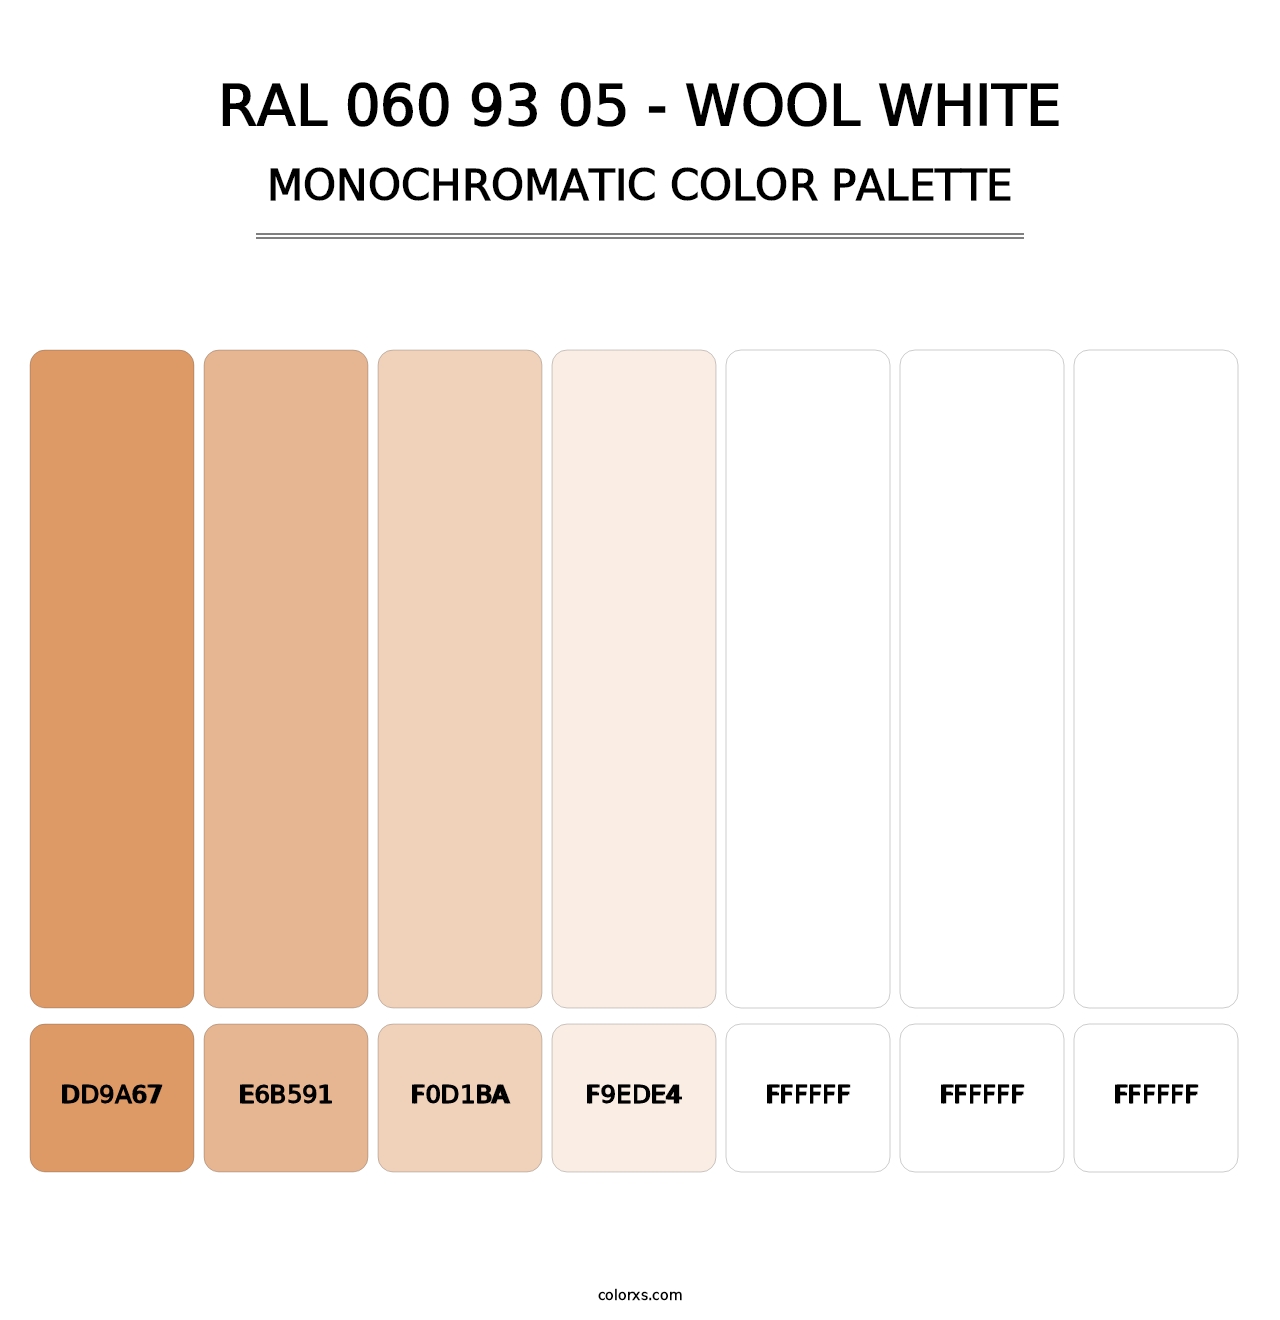 RAL 060 93 05 - Wool White - Monochromatic Color Palette